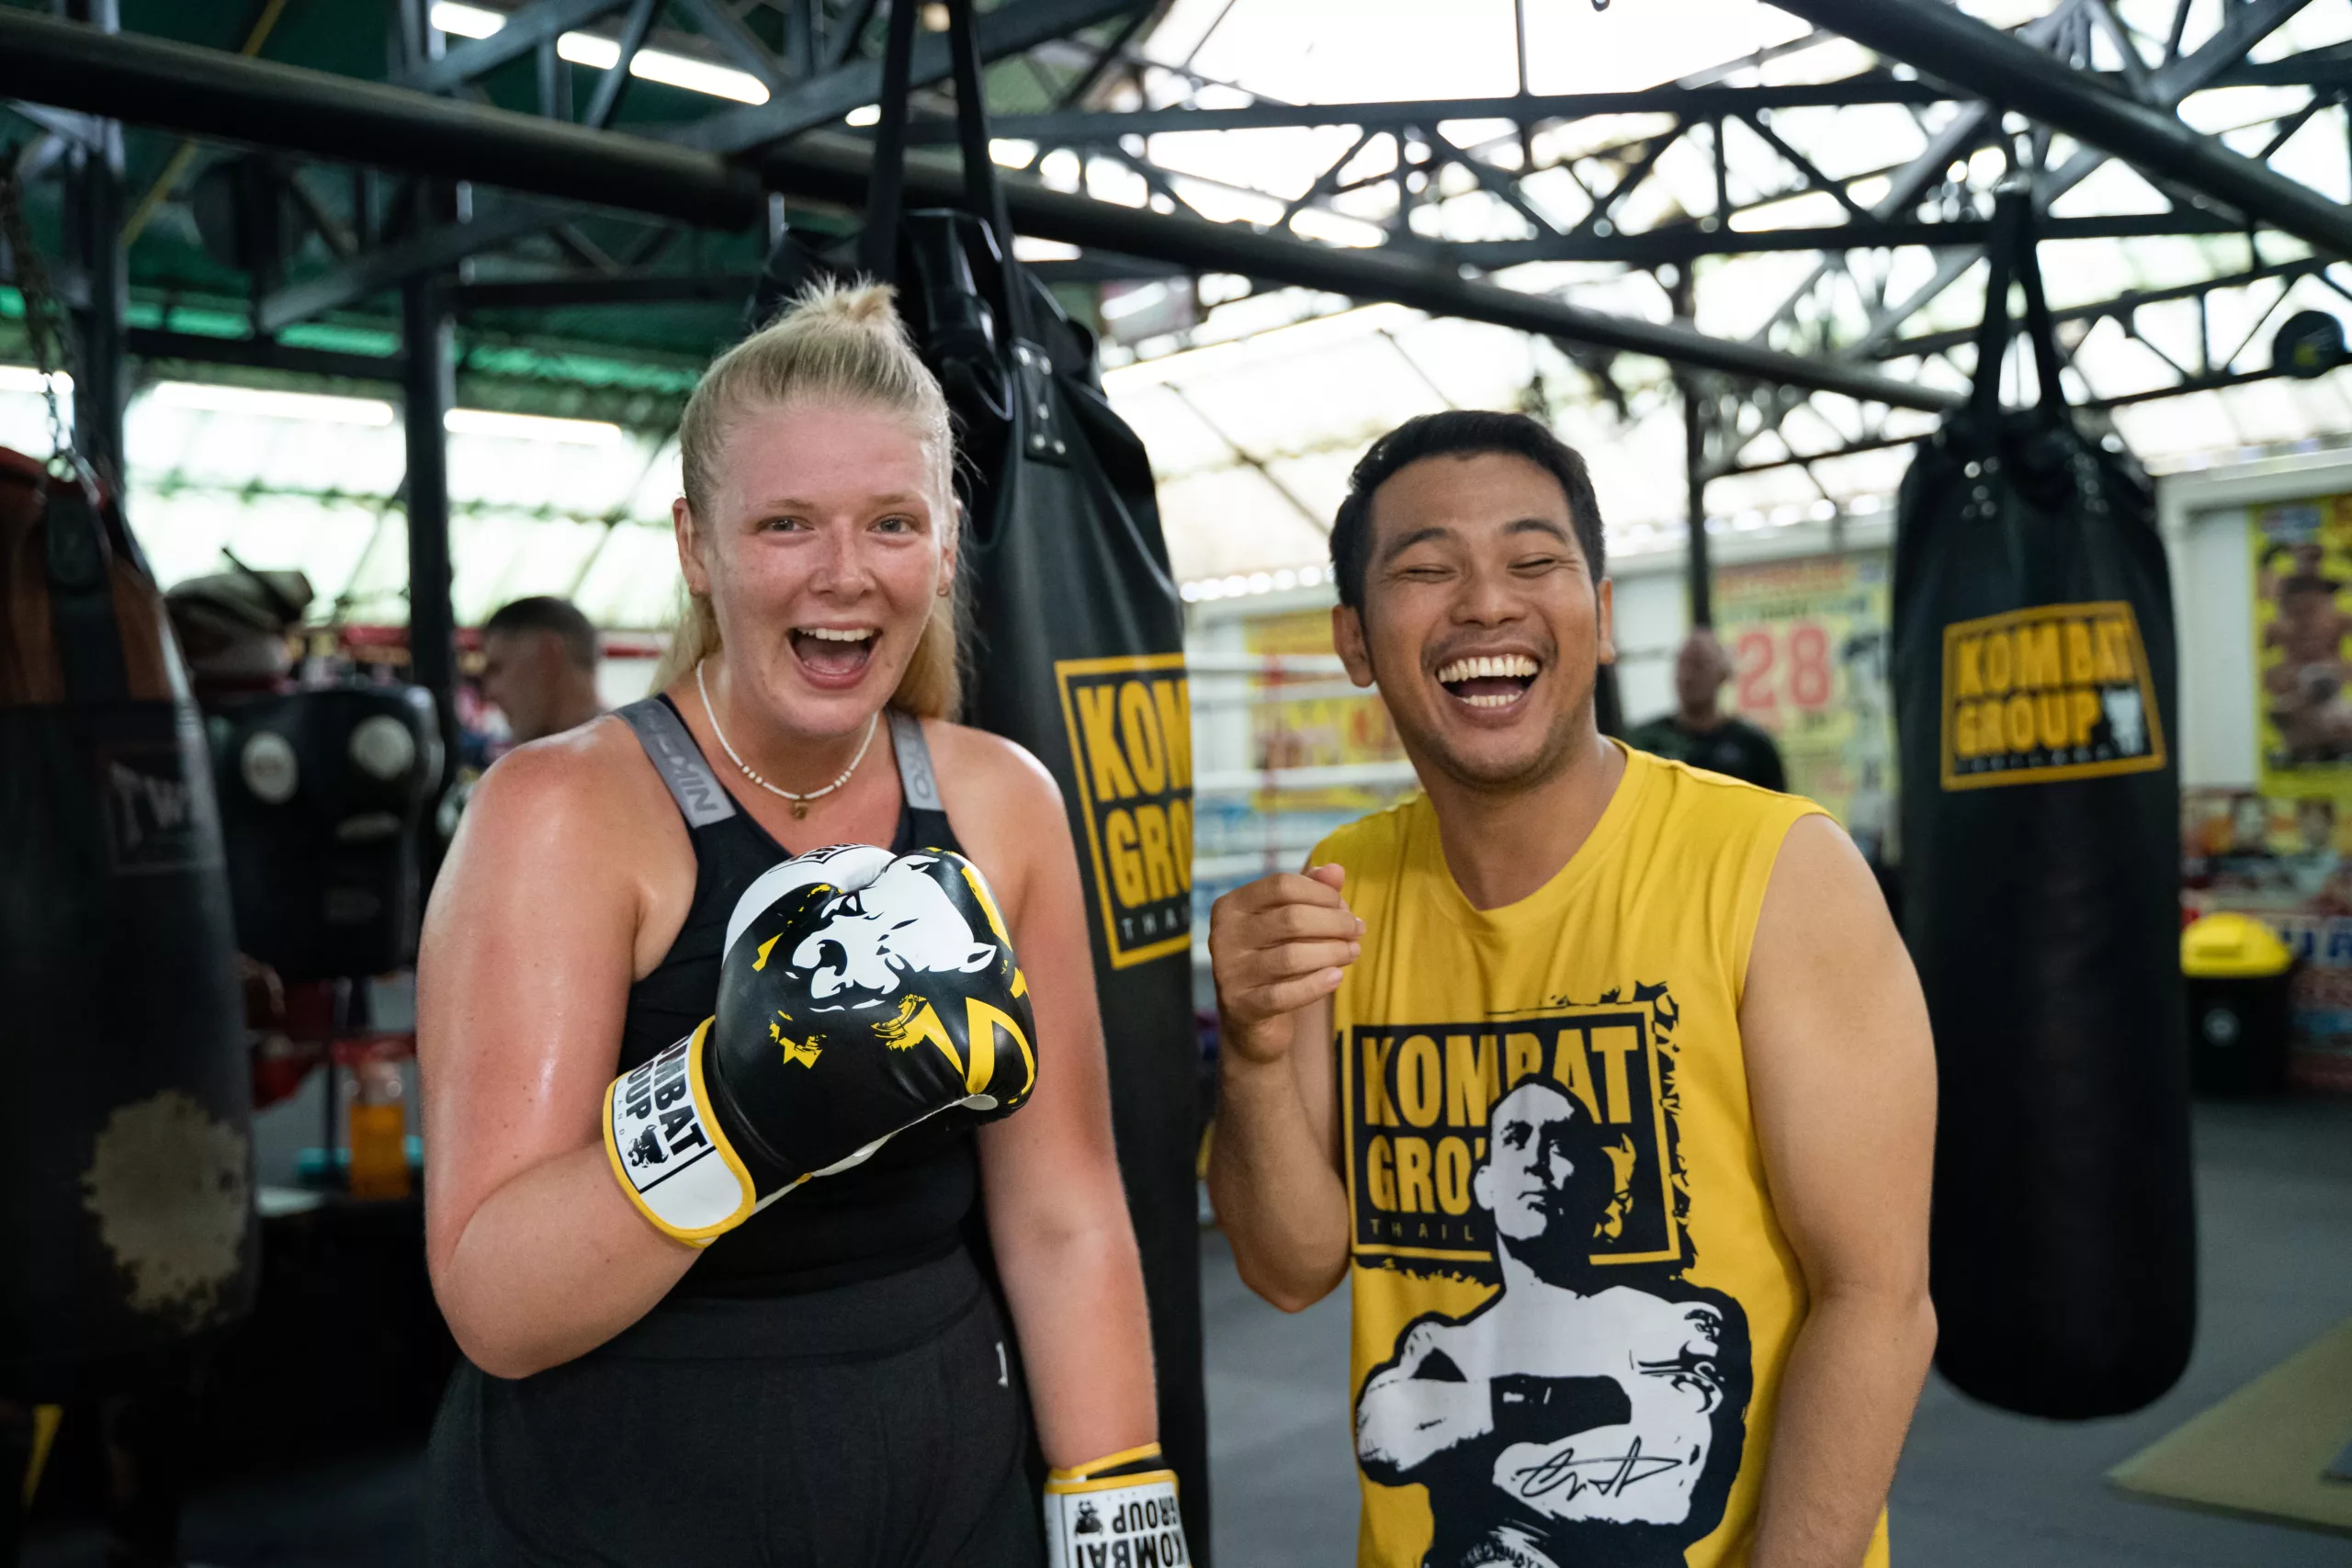 A joyful moment captured between a Muay Thai coach and a student, a woman and a man, laughing together with a sense of accomplishment and camaraderie after a training session, in a gym surrounded by equipment and punching bags.